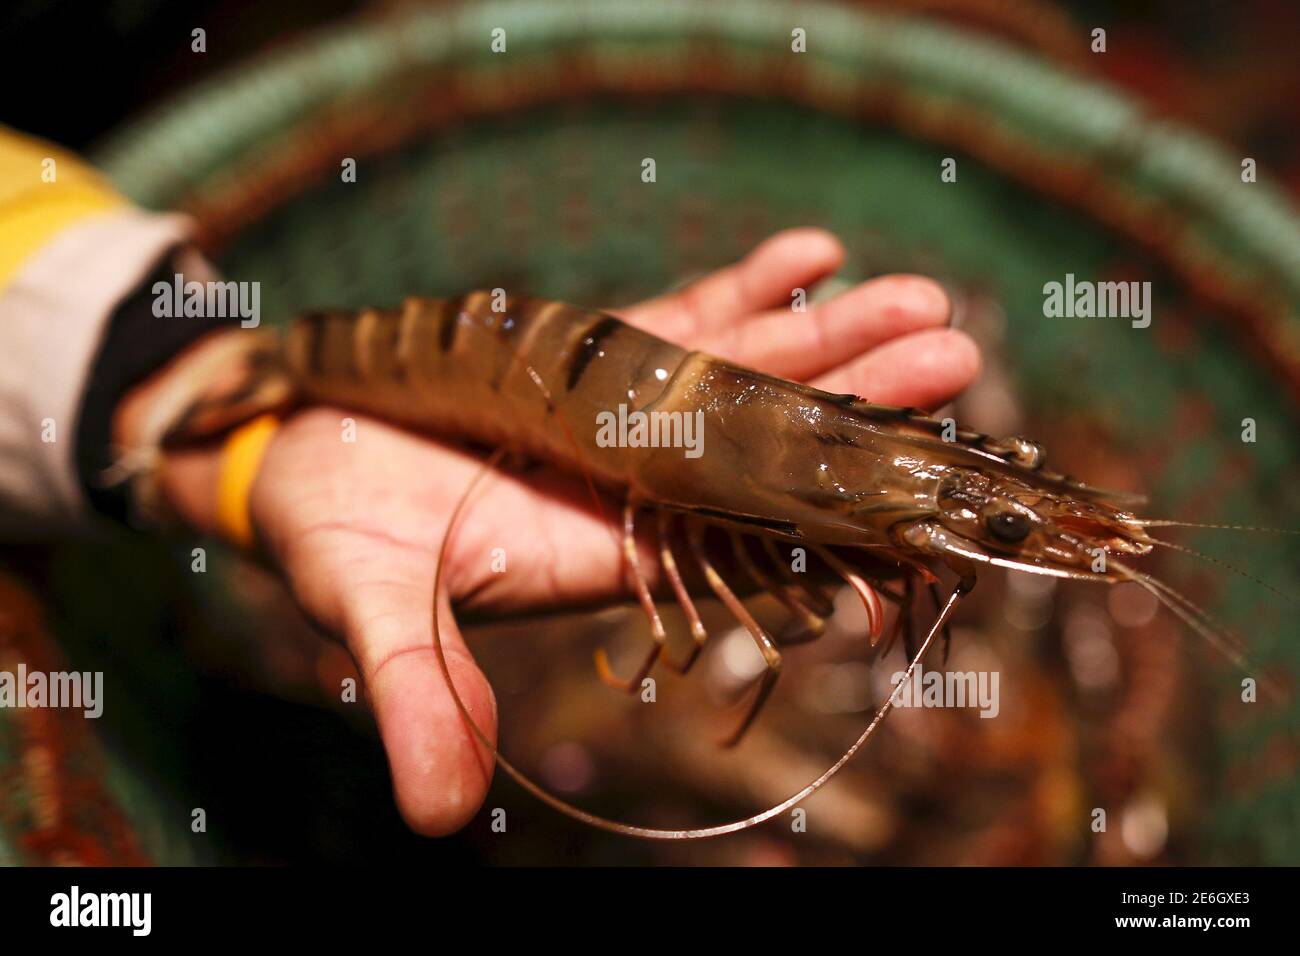 Surakit Laeaddee holds a shrimp after shrimp fishing, at his house in Leam Fa Pha, Thailand, January 26, 2016. Since the 1980s, a boom in shrimp farming has decimated mangroves around the world. The trend has destroyed a key ecosystem for carbon storage, added to emissions of planet-warming carbon dioxide, and exposed shorelines and communities to storm surges and erosion. Now, growing consumer demand for organic and sustainable foods has spurred interest in shrimp farms like Surakit's that may stem mangrove loss and encourage planting in areas long devoid of trees.  Picture taken January 26,  Stock Photo